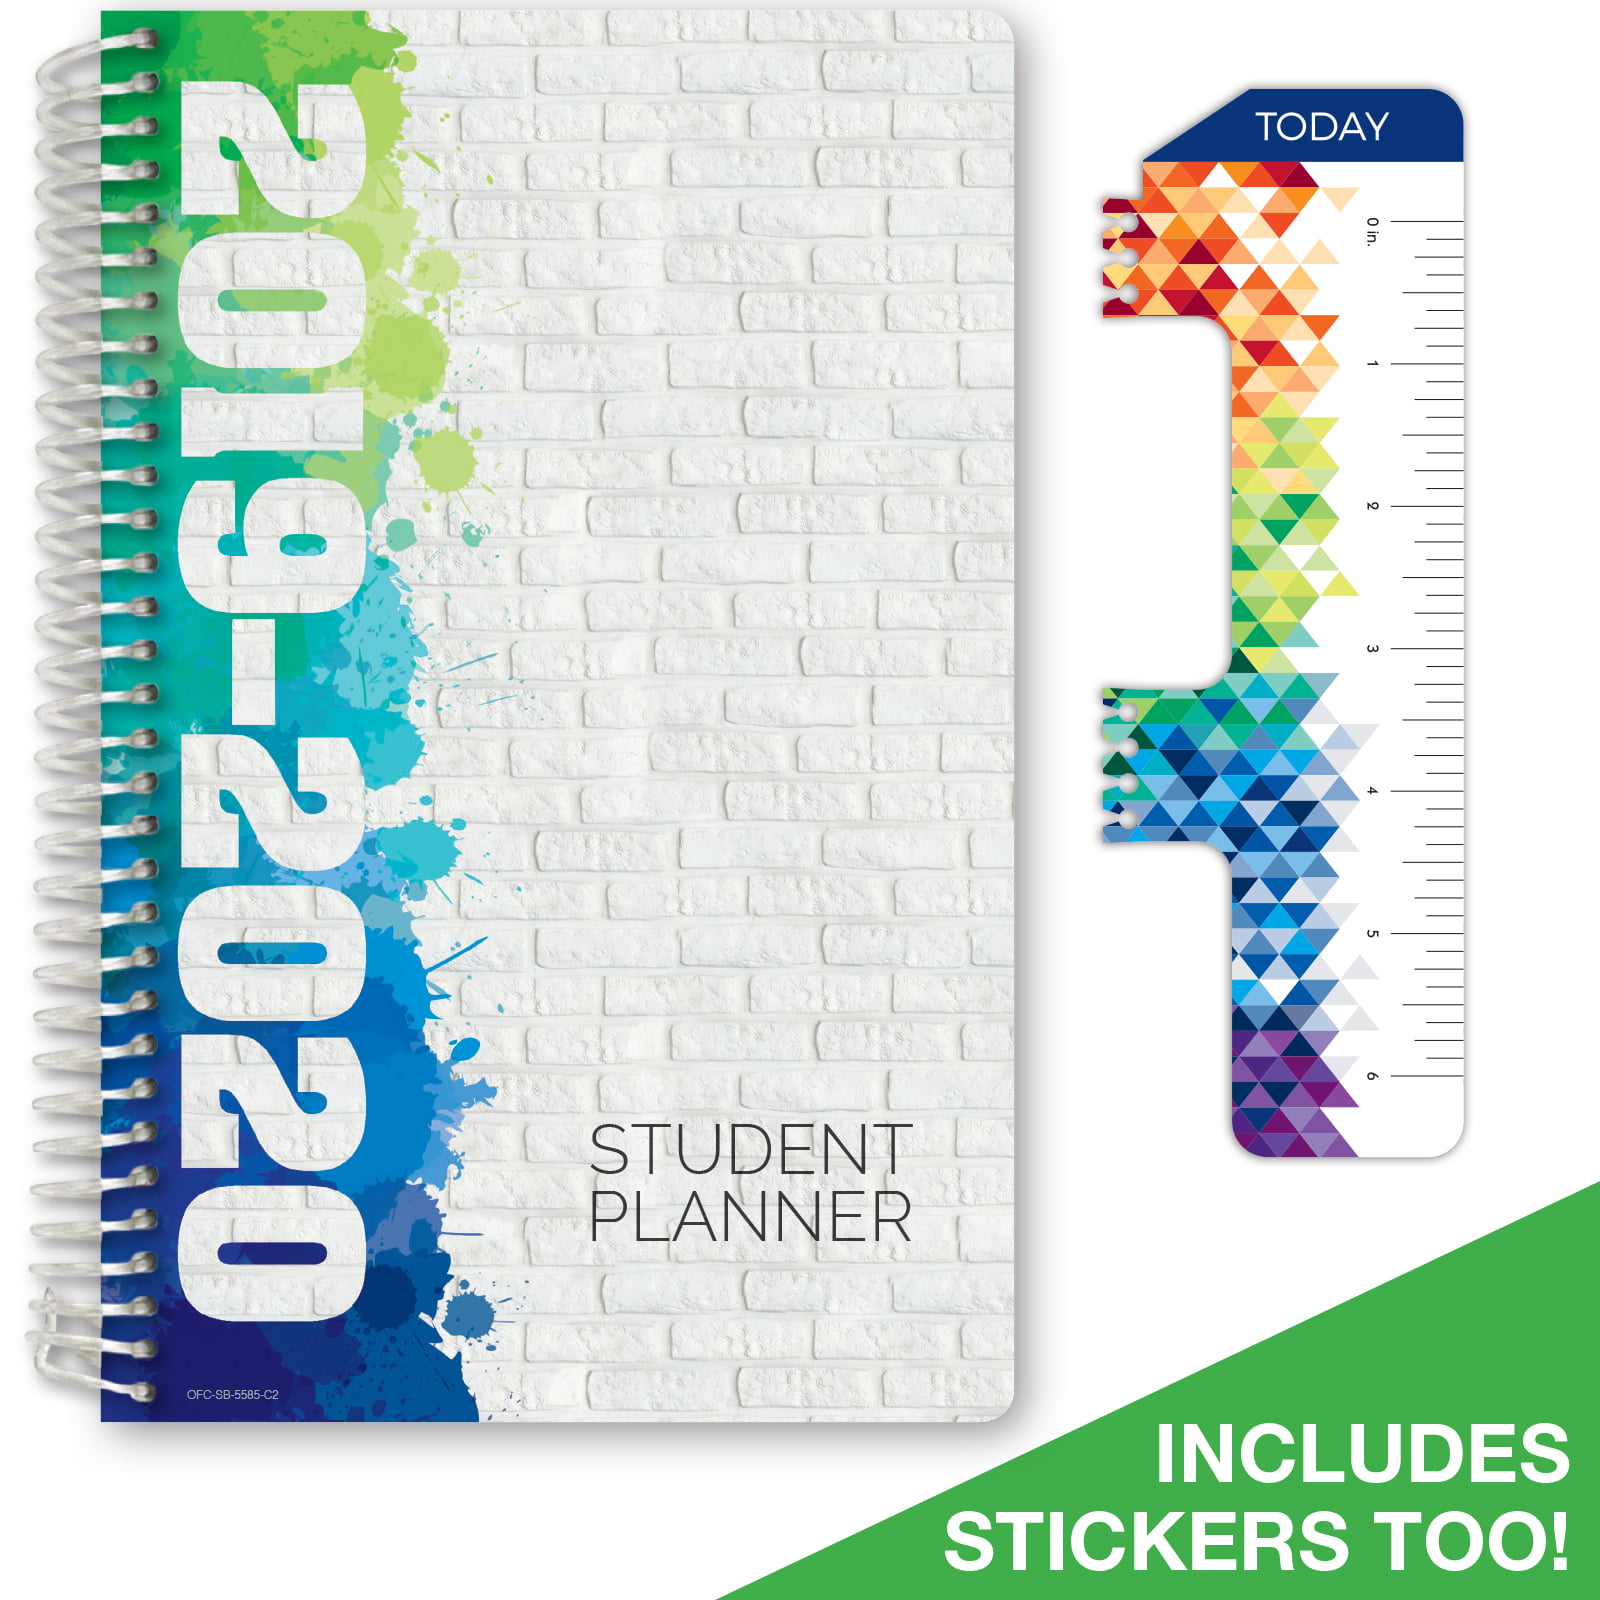 Painted Mini Hardback Patterned Student Planner for 2020 